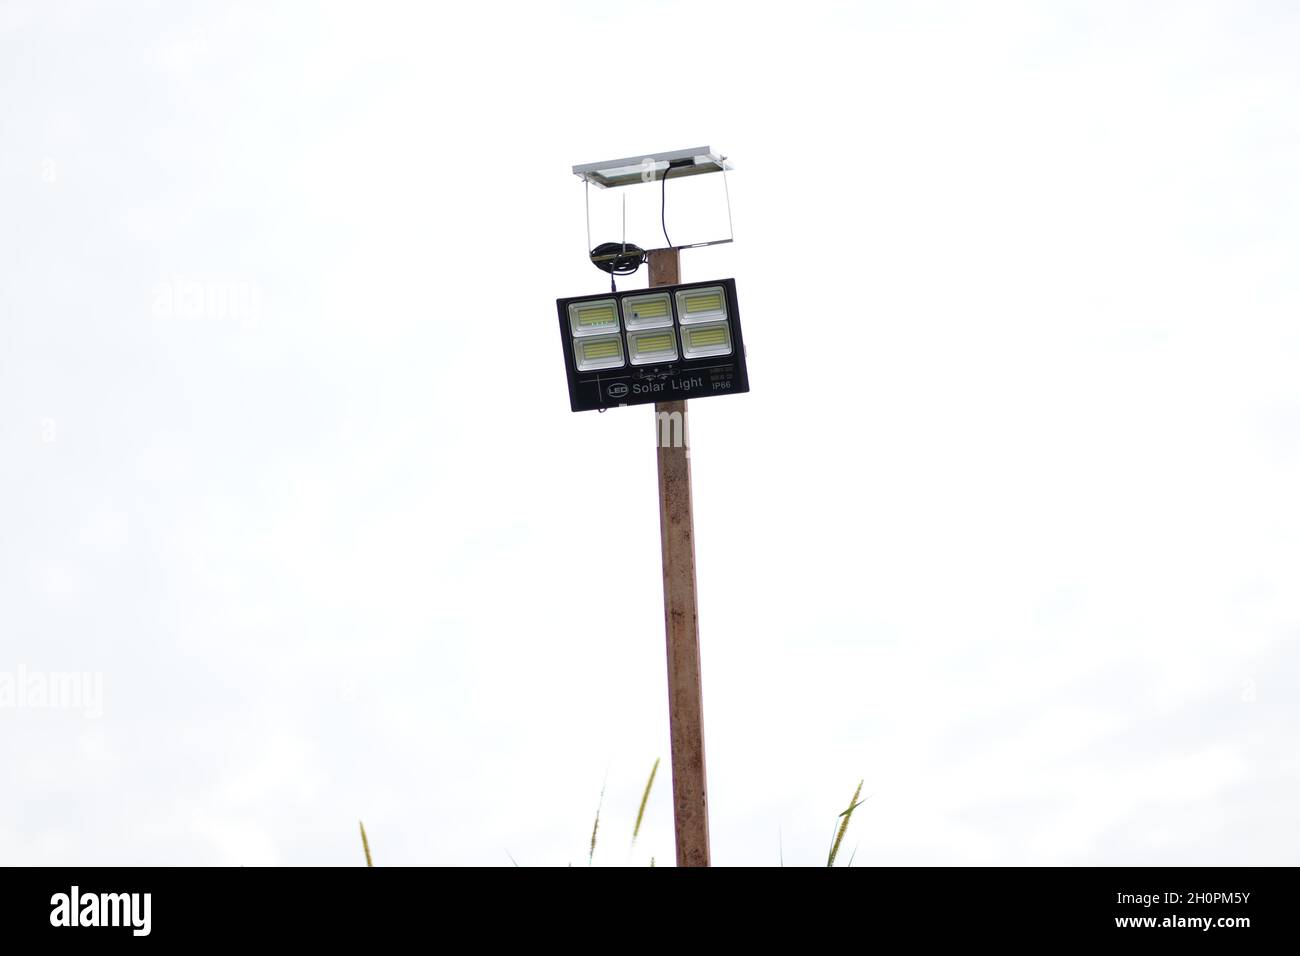 A solar sport light was installed on a pole to light the coverage area at night. The solar sport light is used to light the construction store at night. Stock Photo